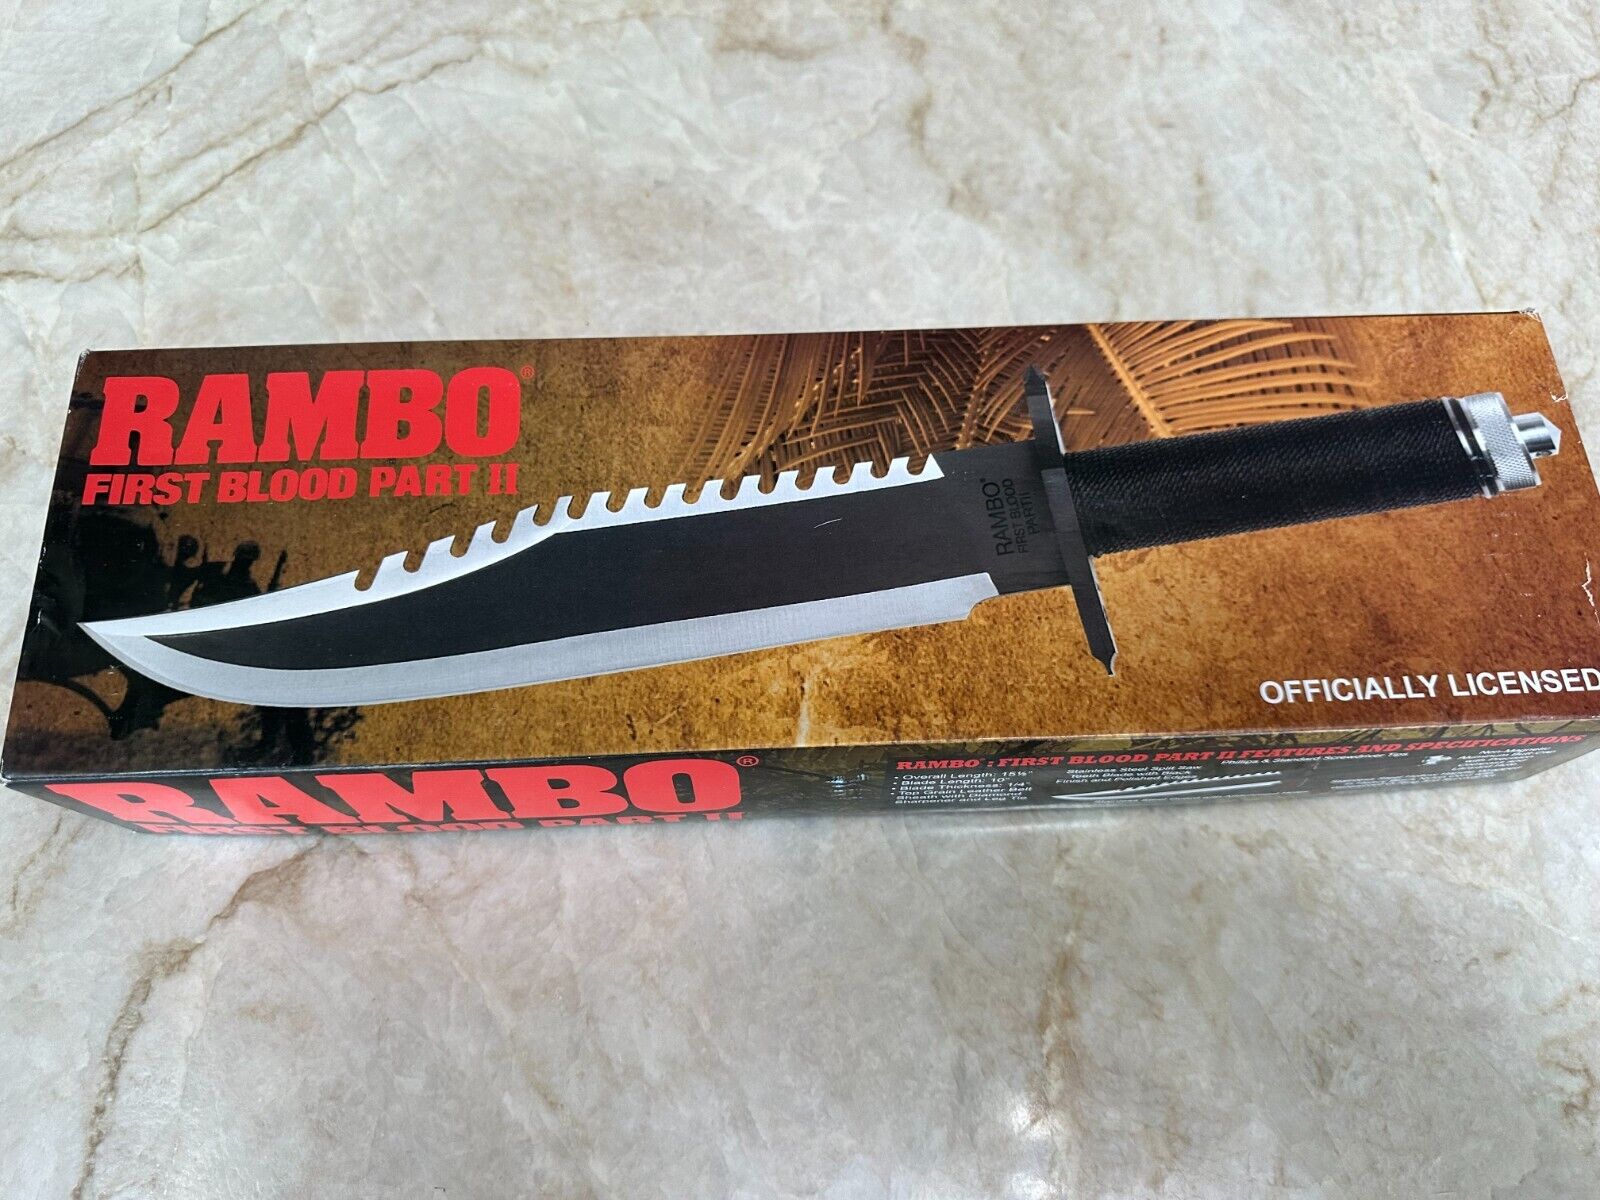 Rambo First Blood Part II Bowie Knife - Officially Licensed